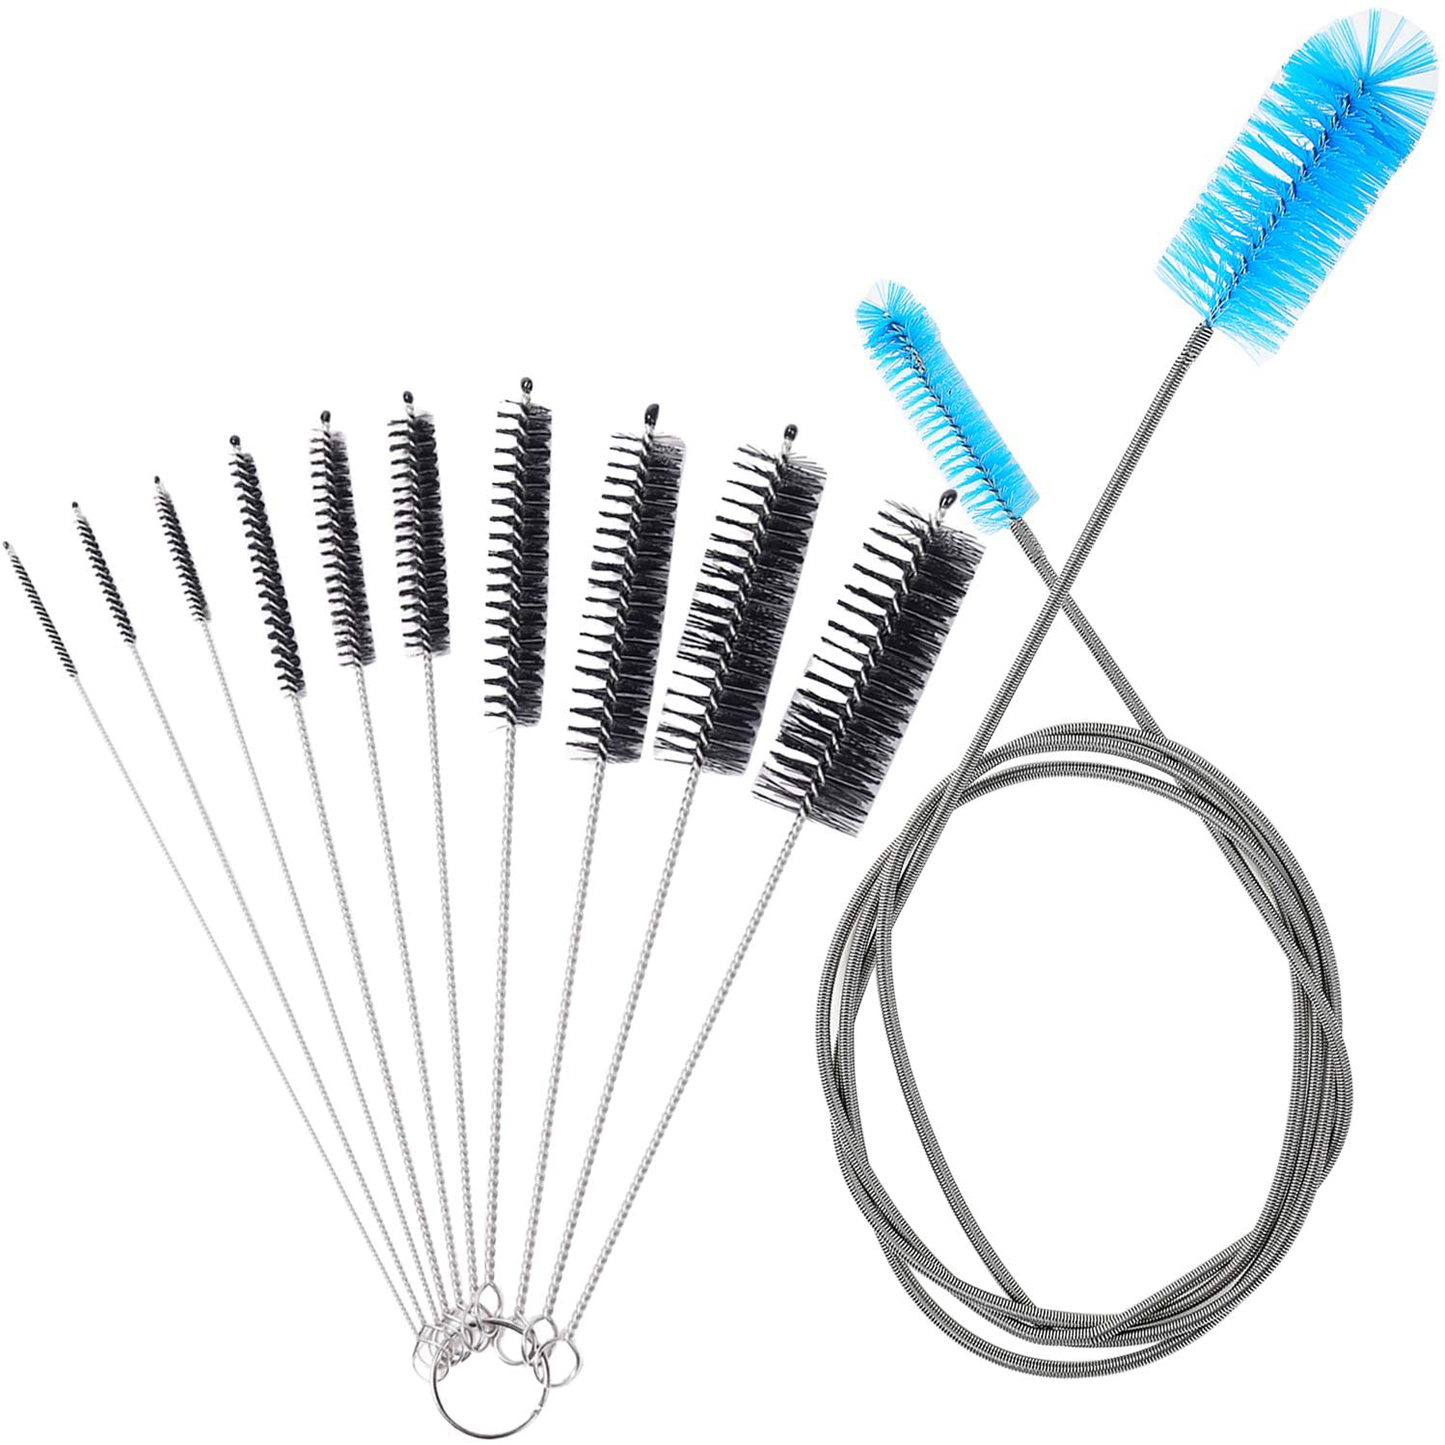 1pc Blue Pipe Cleaning Brush Set, Flexible Stainless Steel Nylon Double End  Soft Hose Water Pipe Cleaner For Household Kitchen Laboratory Fish Tank  Aquarium